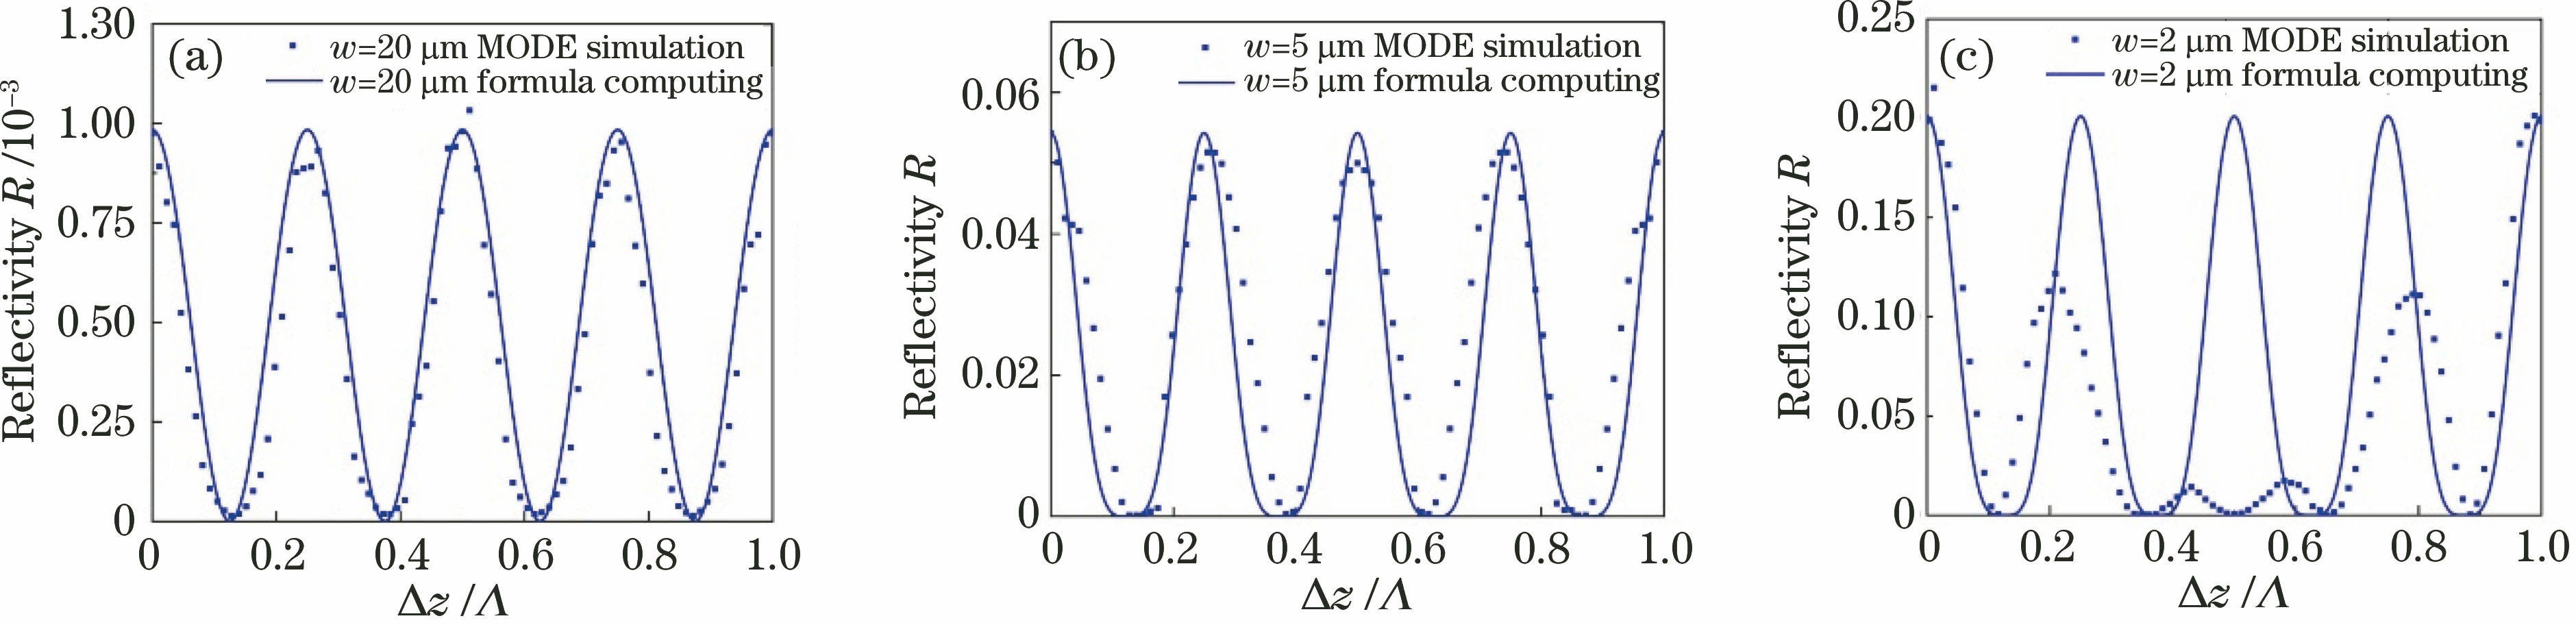 Comparison between simulation and calculation of lateral asymmetric grating reflectance changes with different ridge widths. (a) w=20 μm; (b) w=5 μm; (c) w=2 μm